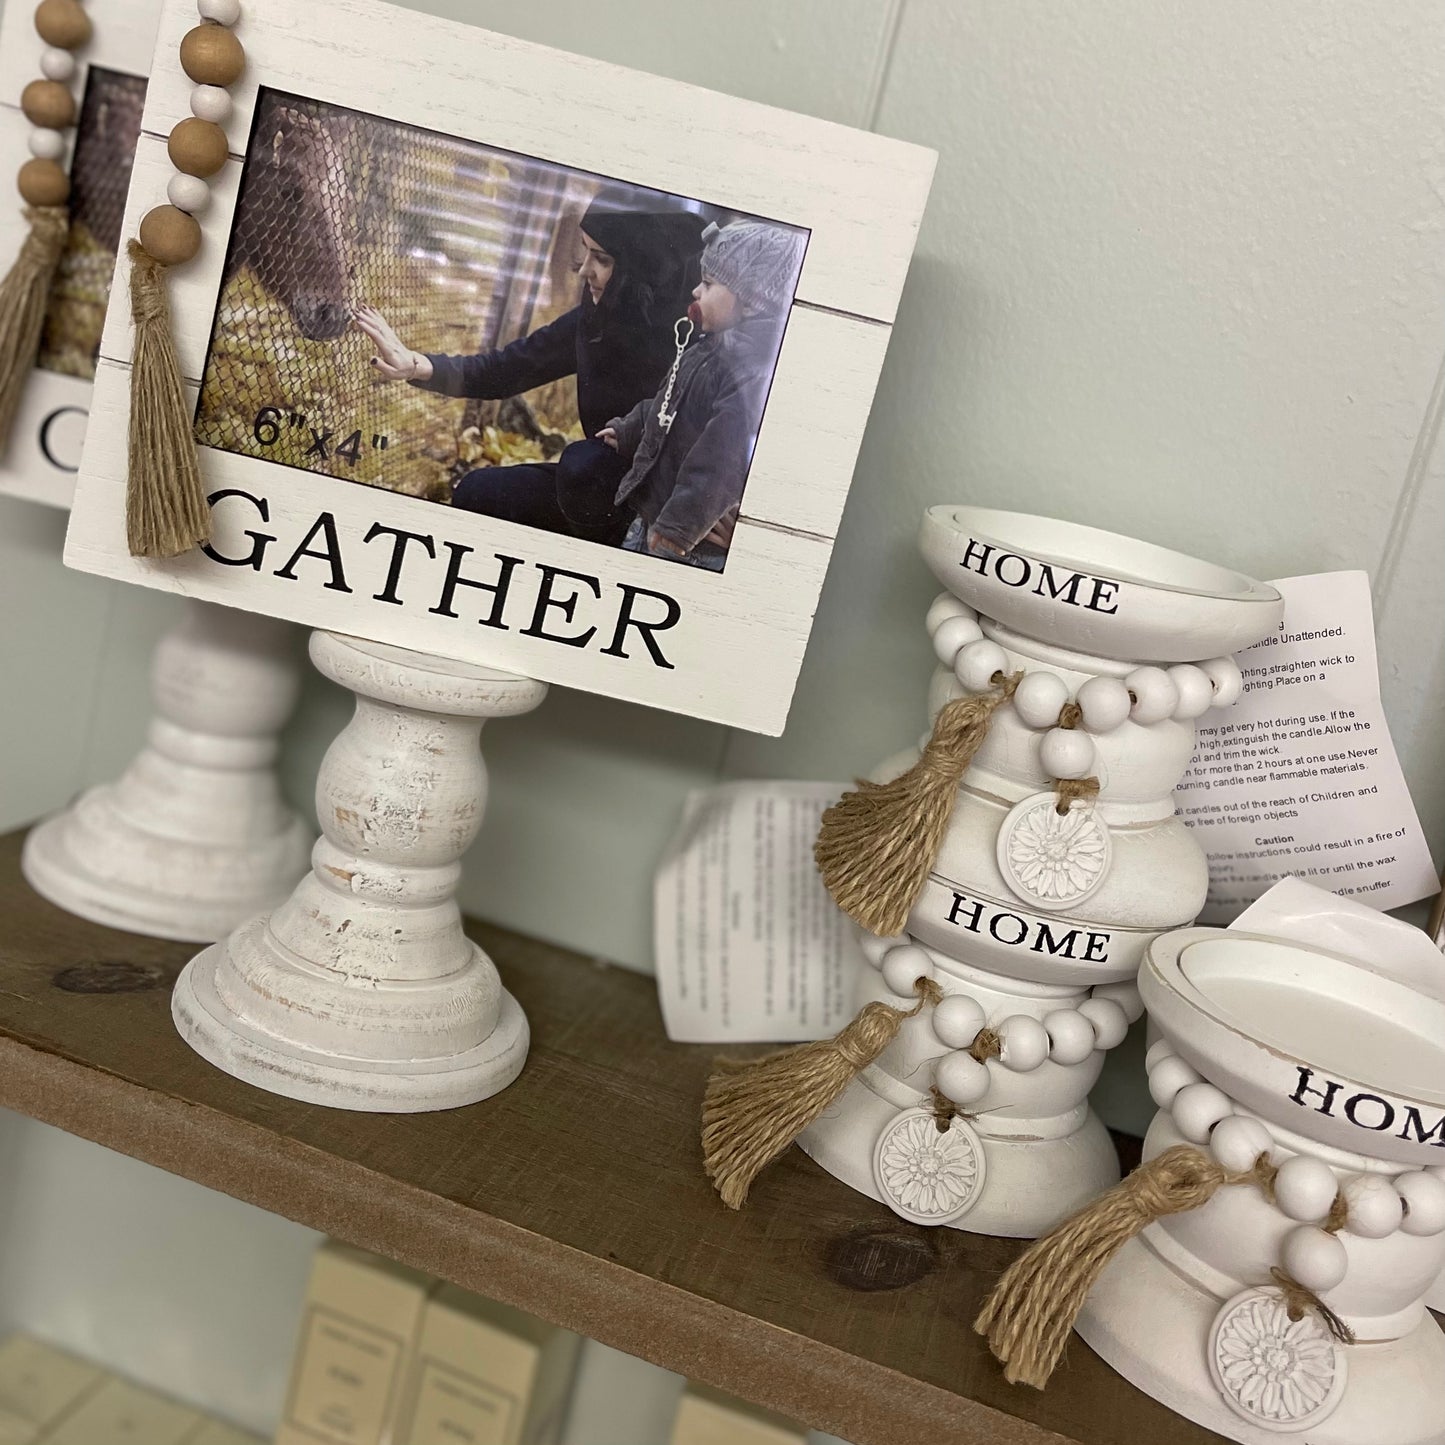 Gather 6x4 Frame or Home Candle Holder